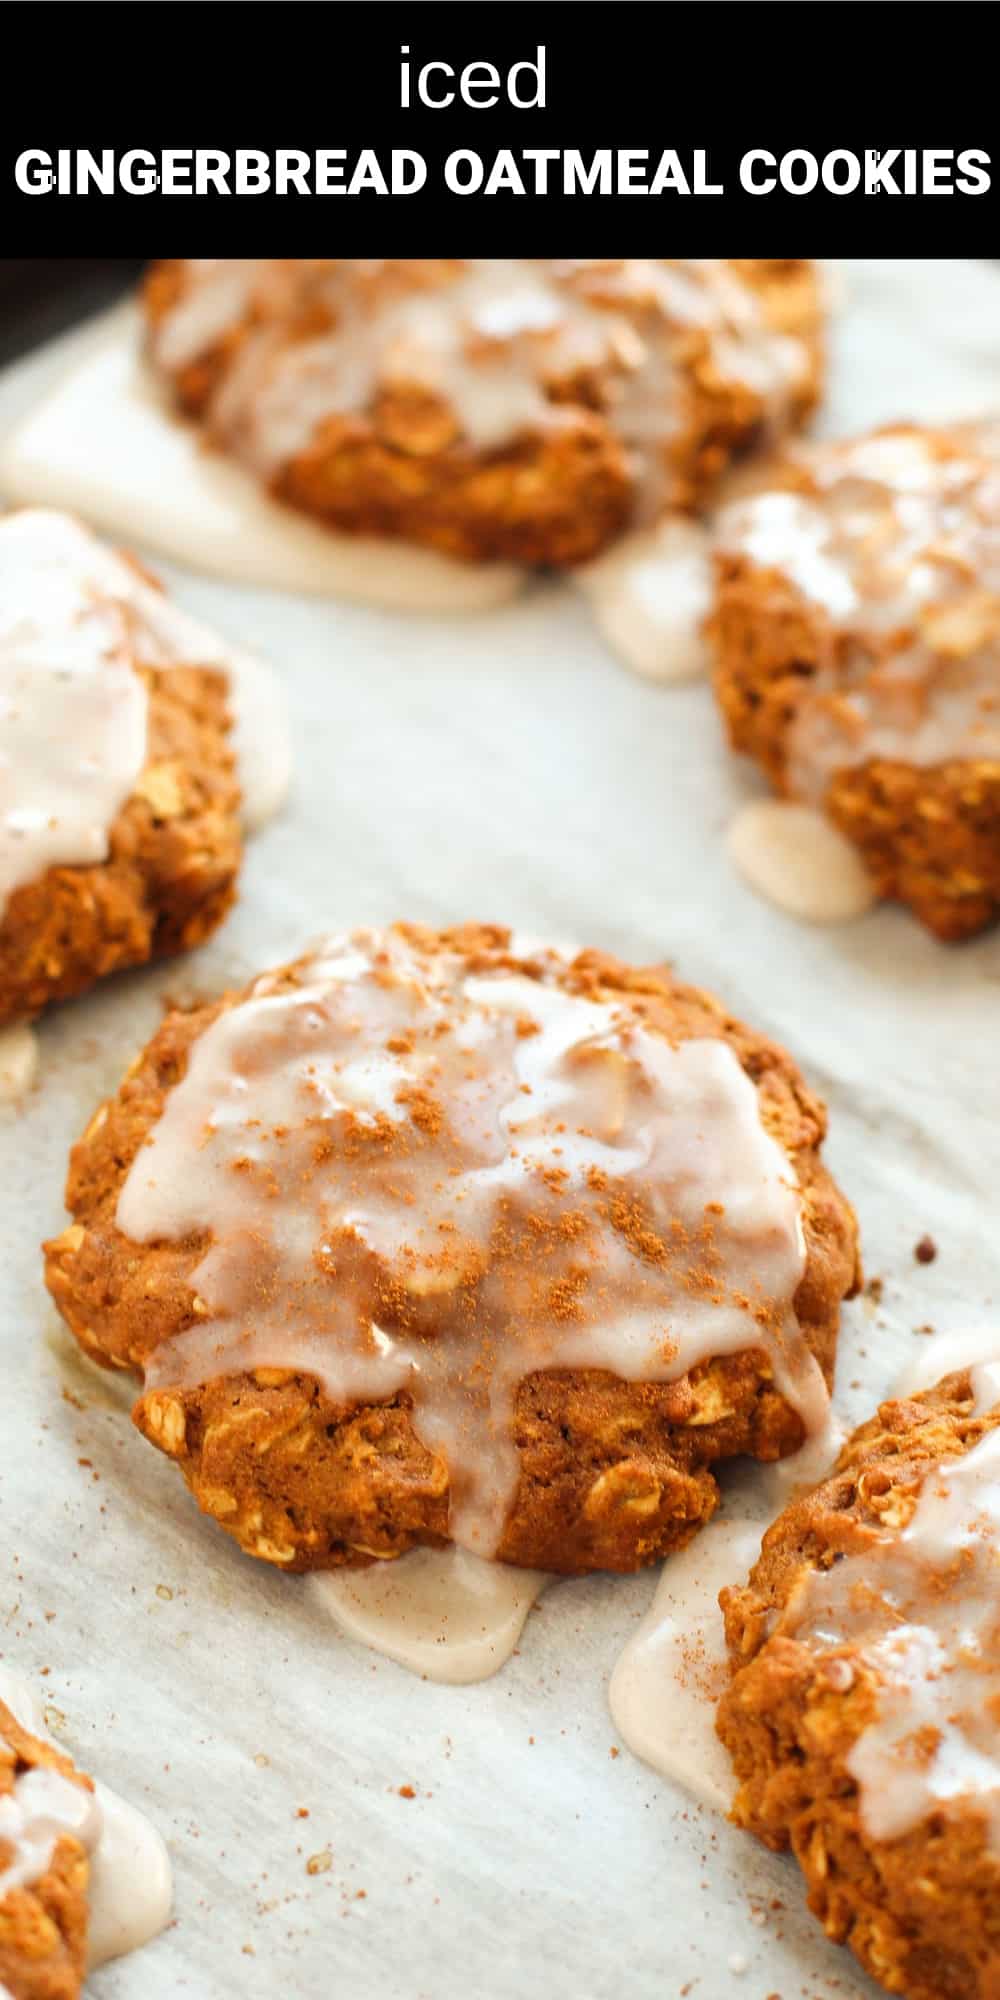 These iced gingerbread oatmeal cookies combine the perfect texture of soft and chewy oatmeal cookies with the warm spice flavor of gingerbread. They’re a delicious sweet treat that deserves a prime spot on your holiday dessert table.